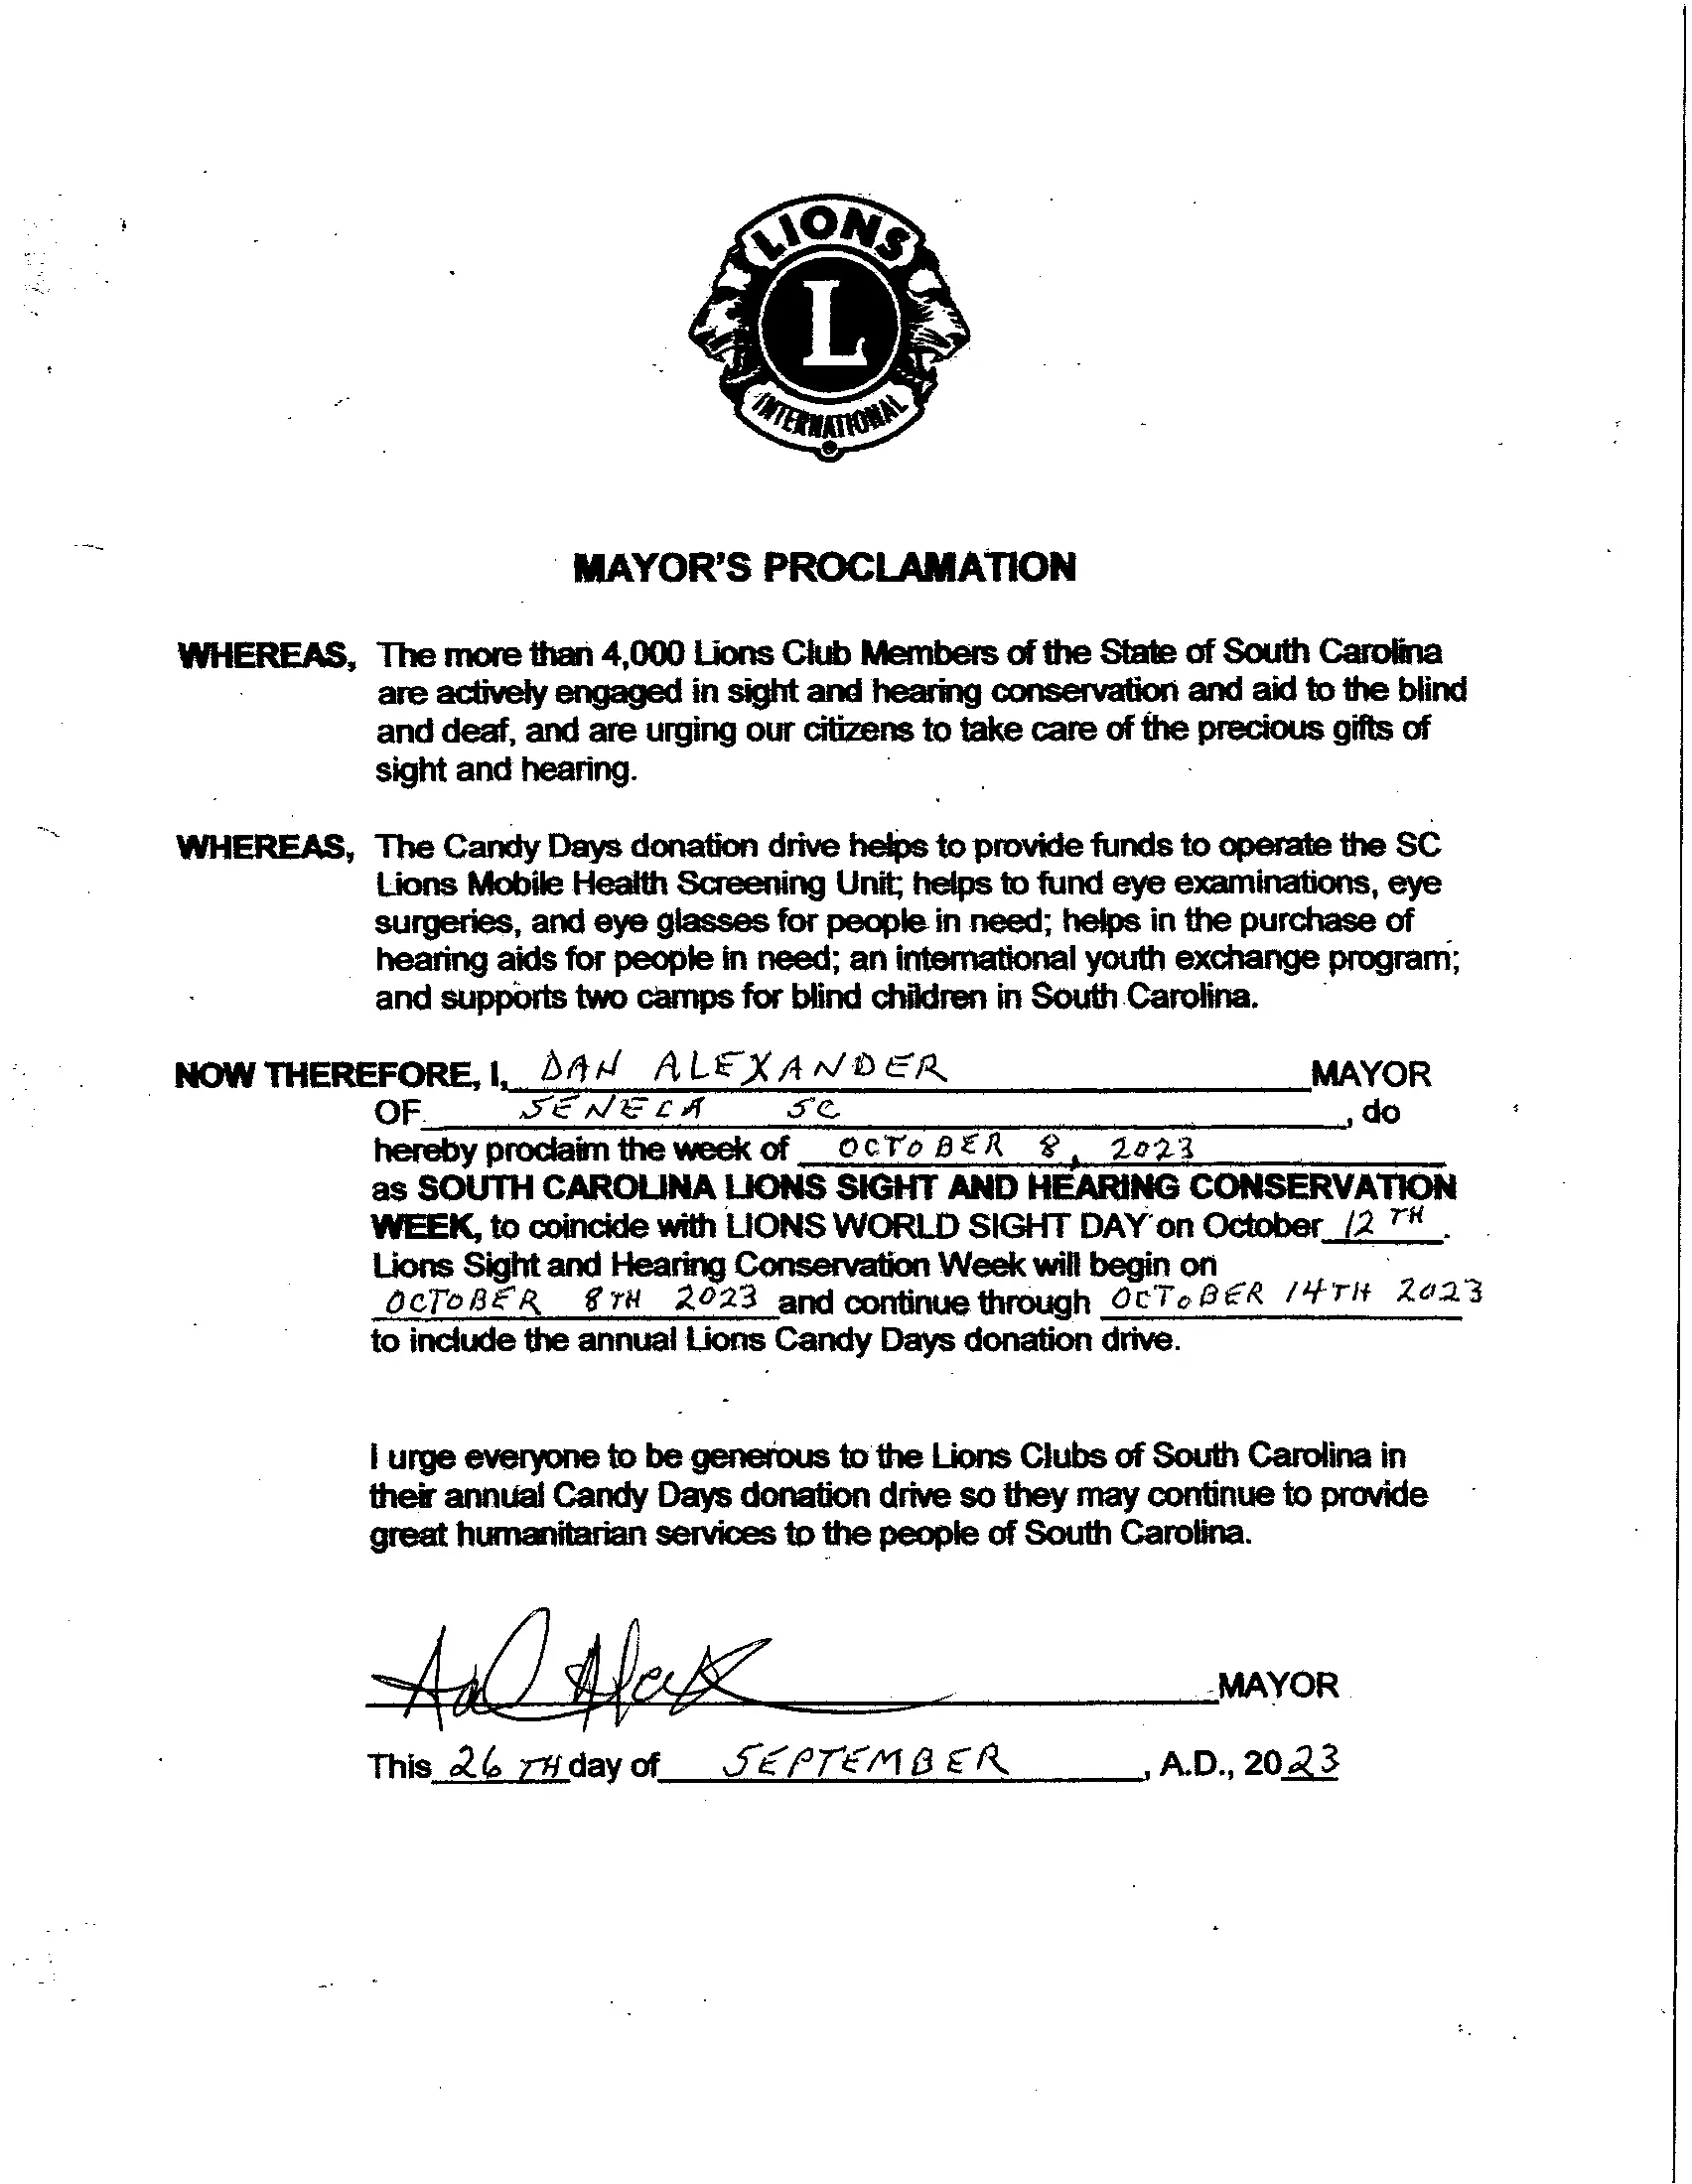 mayor-s-proclamation-lions-sight-hearing-conservation-week-2023